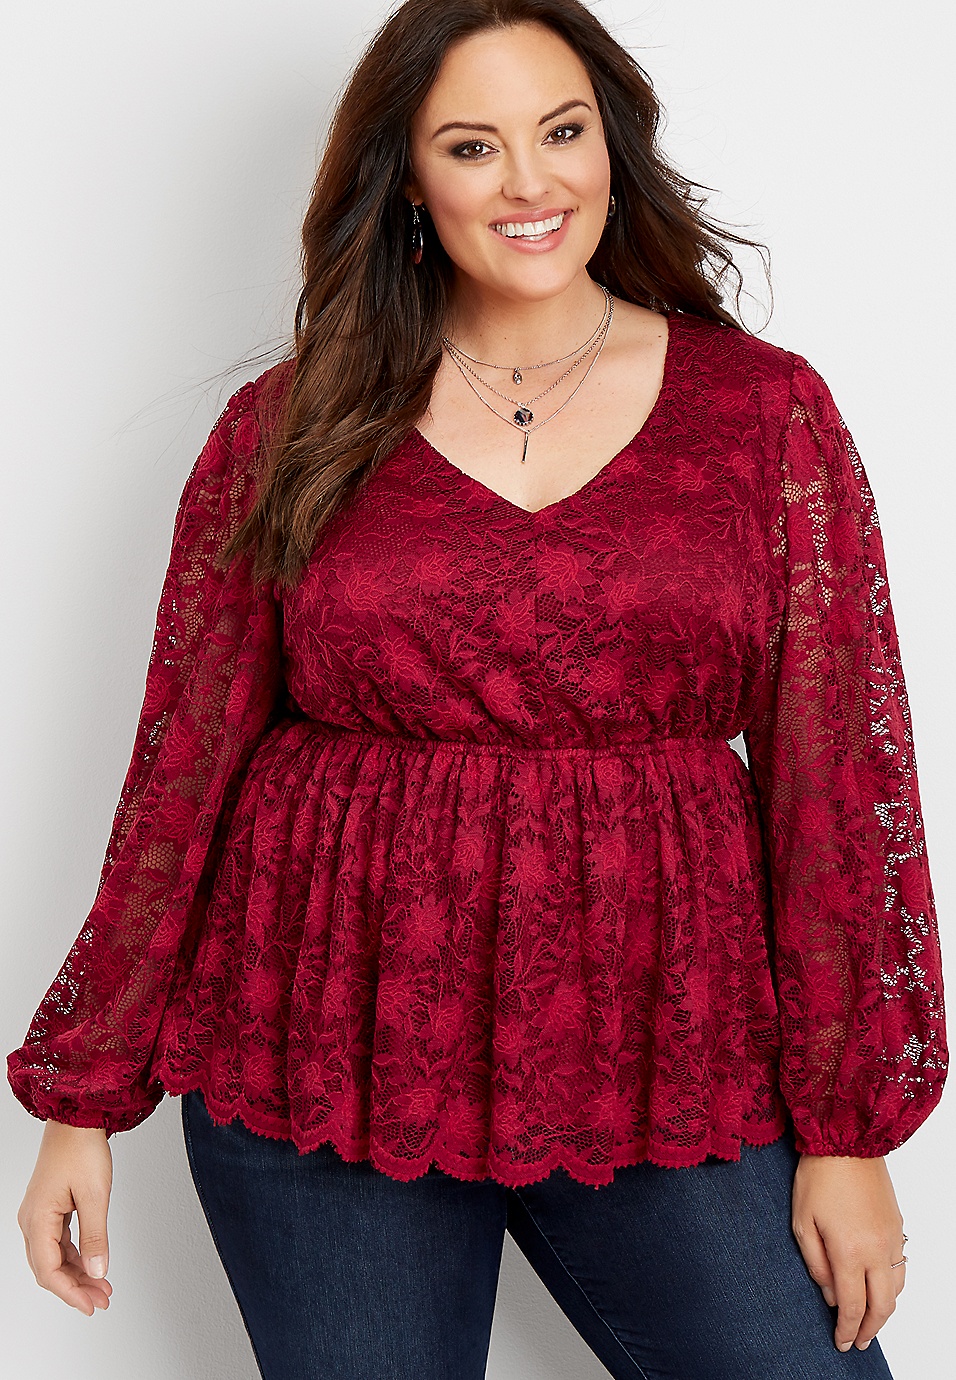  LIENRIDY Women Plus Size Tops Casual Blouses Lace